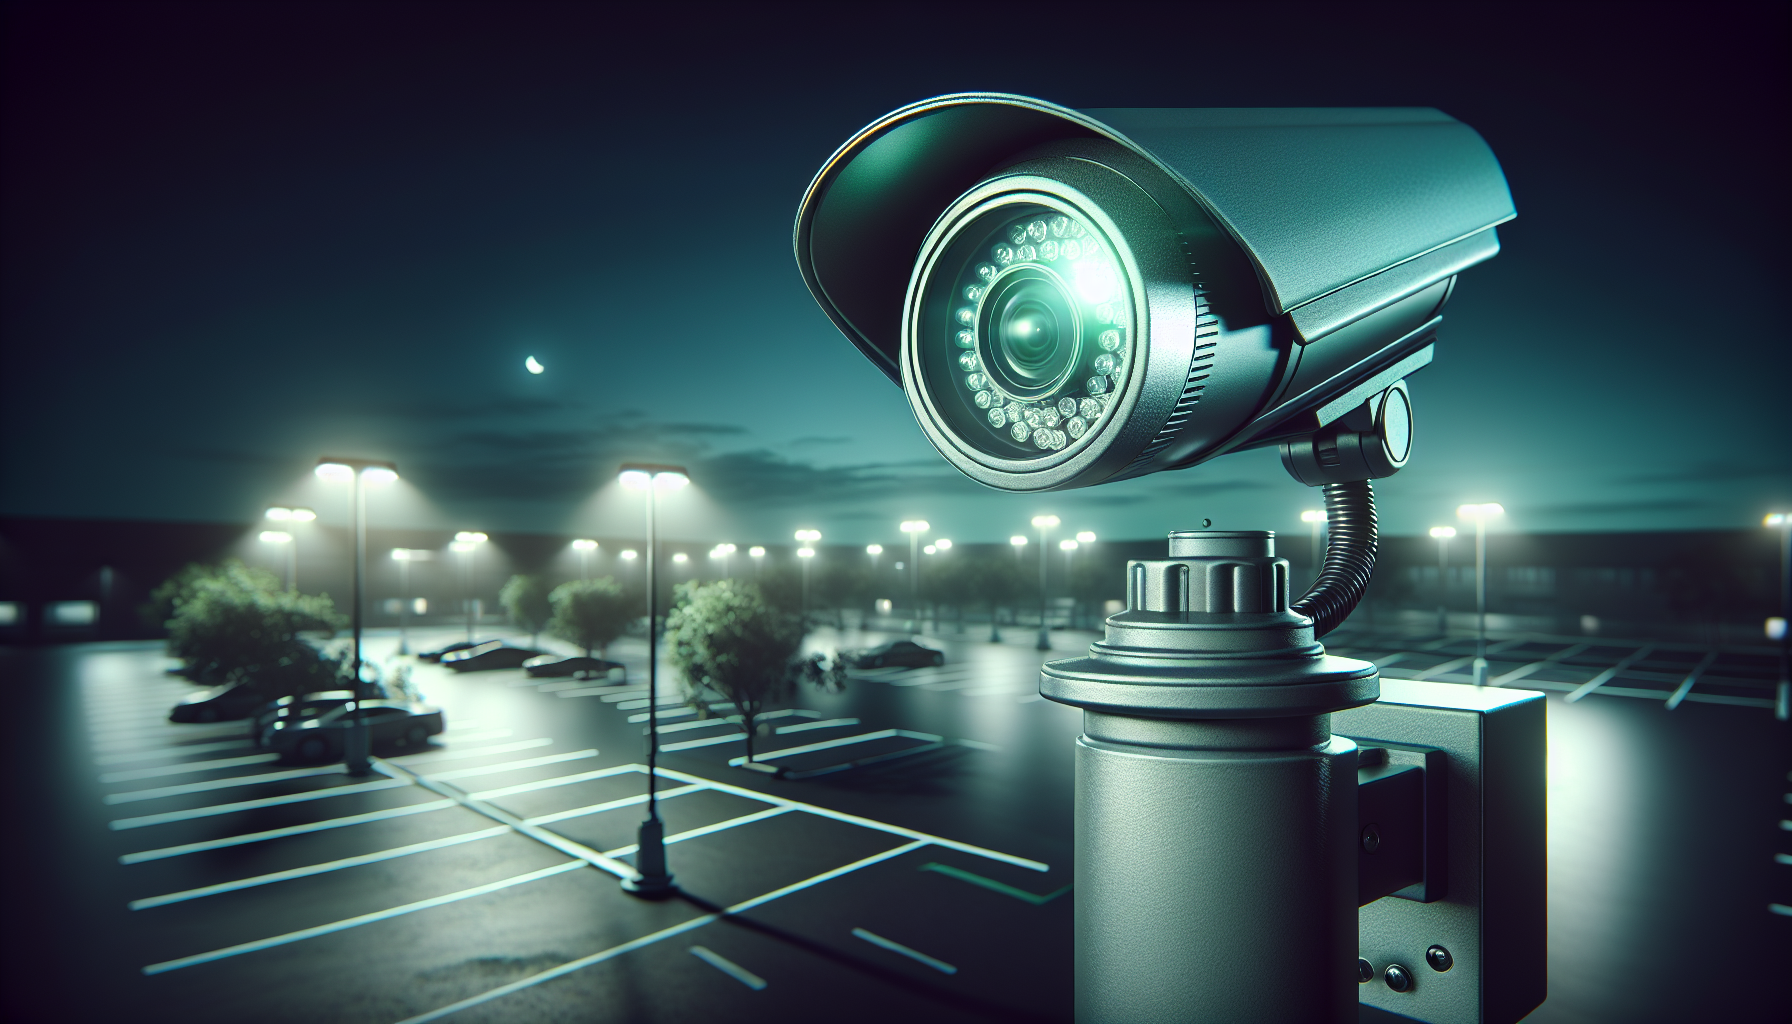 Illustration of parking lot camera with night vision